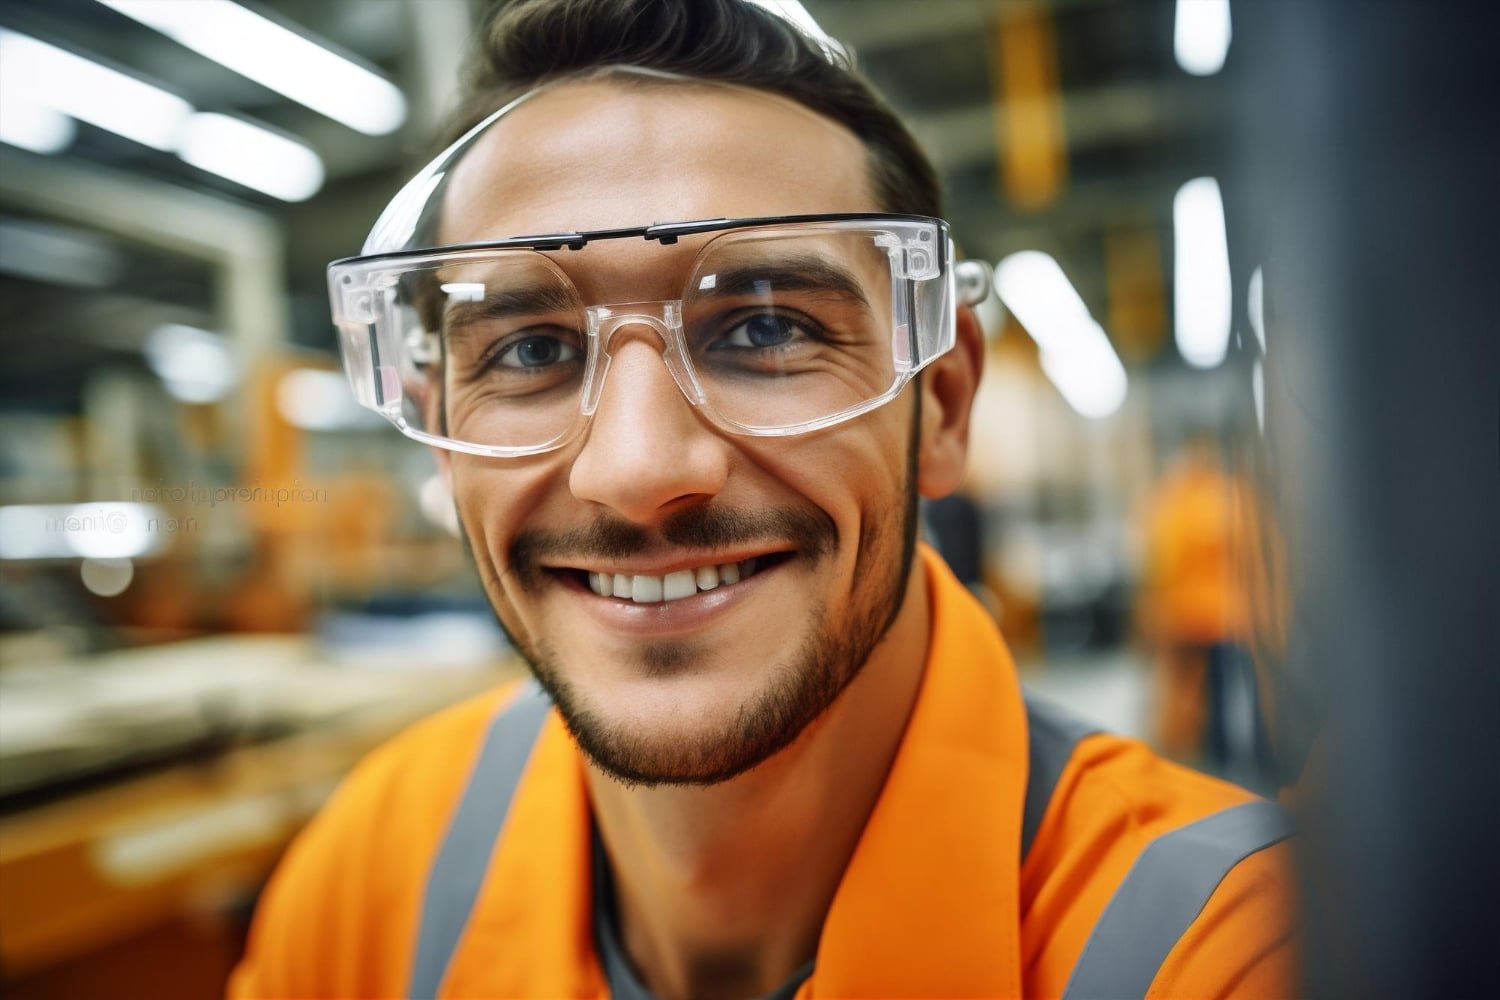 Find Protective Eyewear At RX Safety’s Online Store